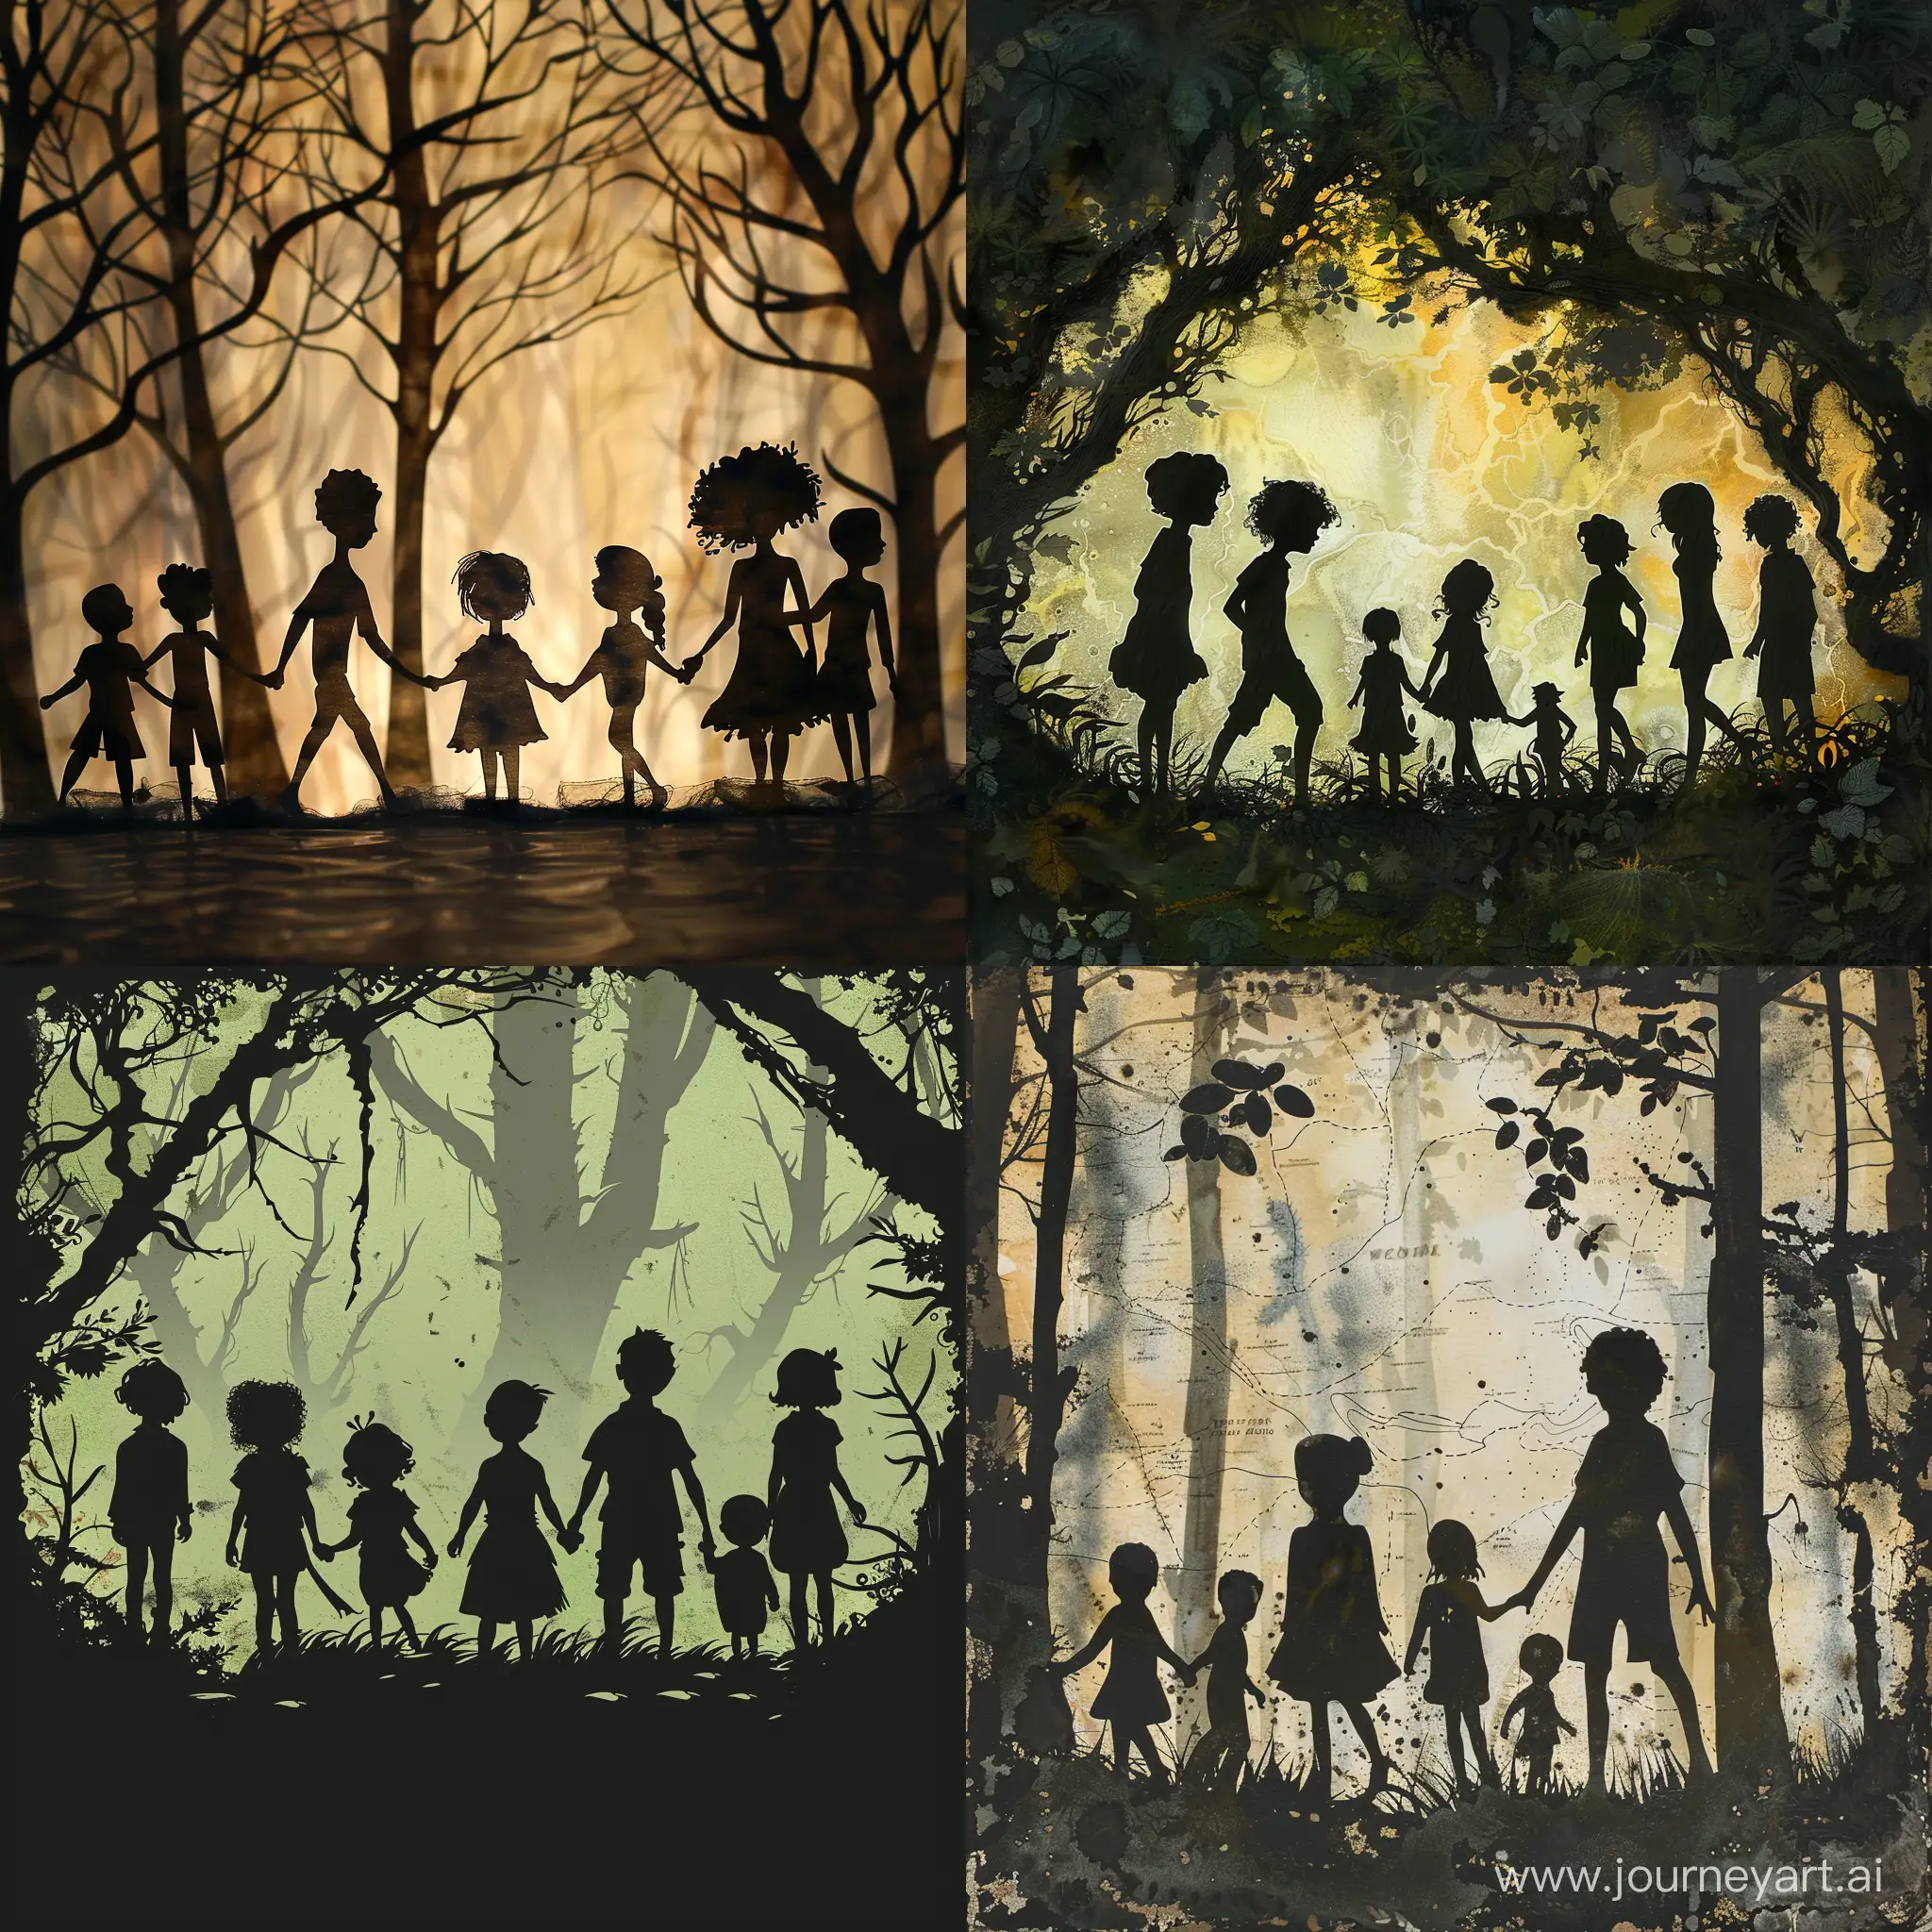 Silhouettes-of-Forest-Children-Mysterious-and-Evocative-Artwork